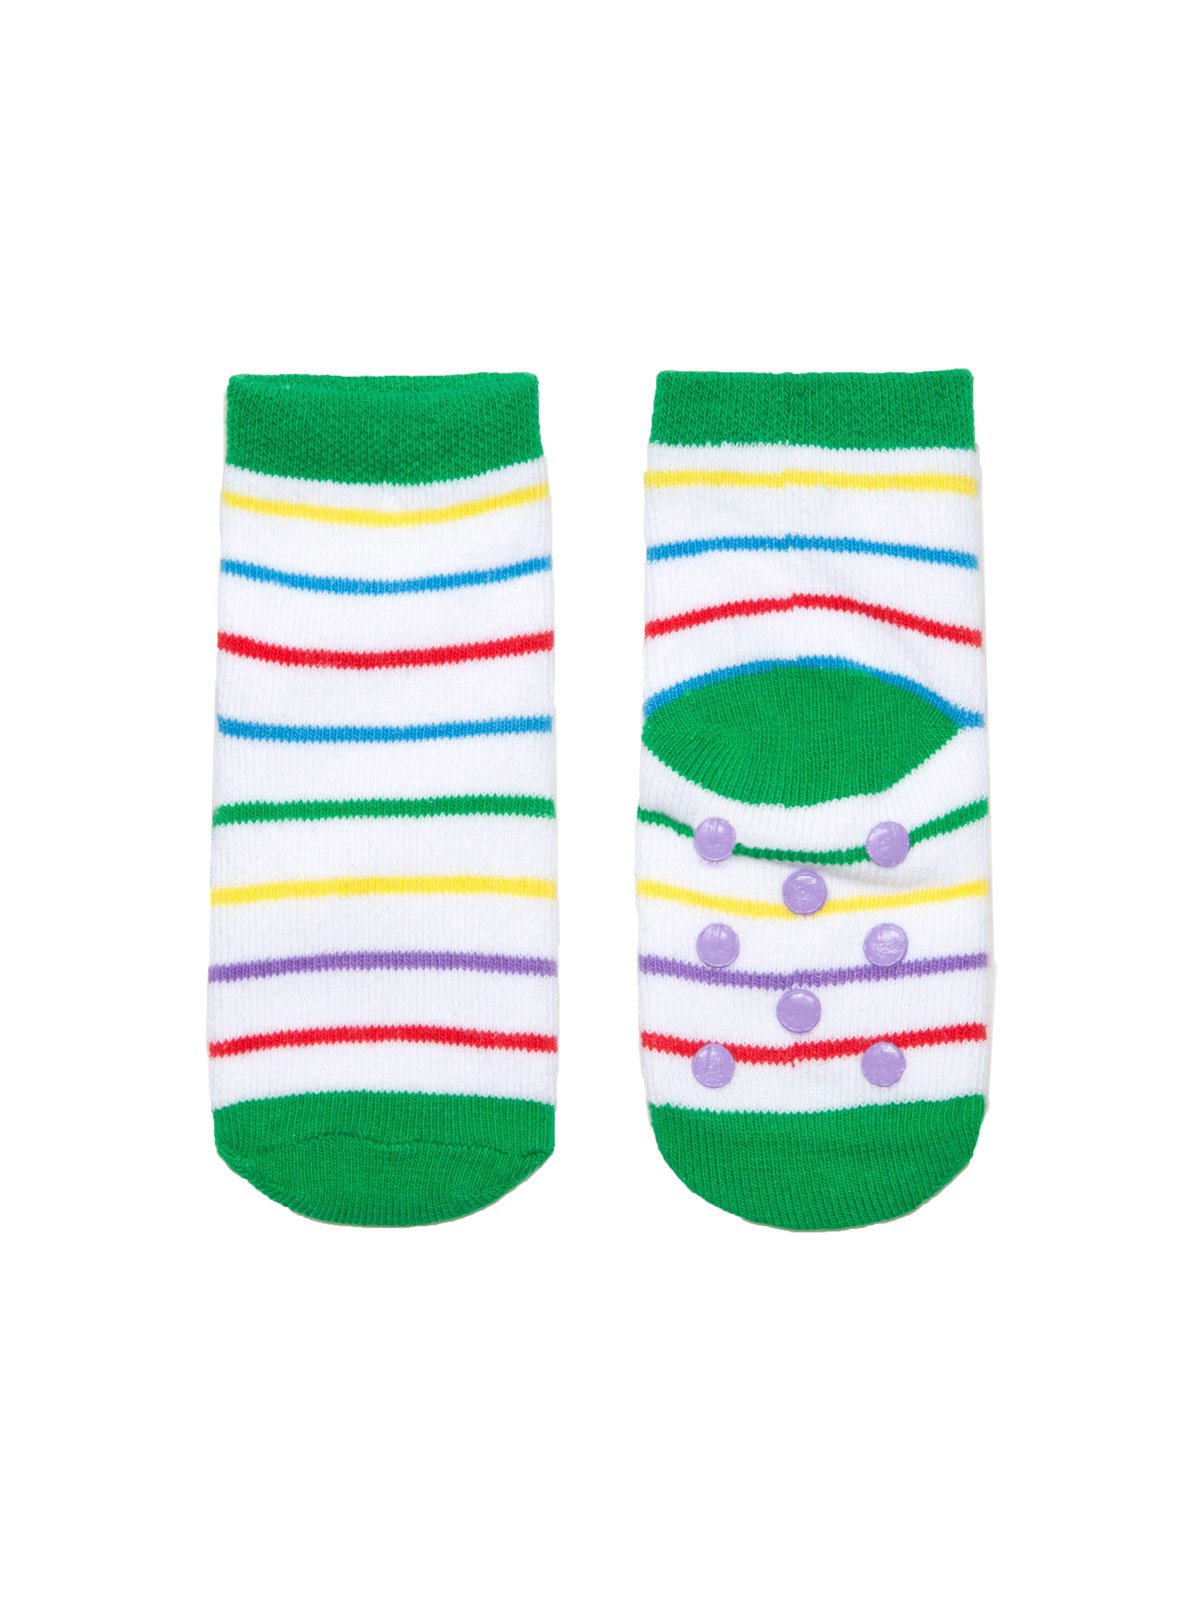 Shown from the front and back, the white socks with a green heel, toe, and cuff feature  a yellow, blue, red, and green striped pattern. Theses socks also feature rubber grips on the foot.